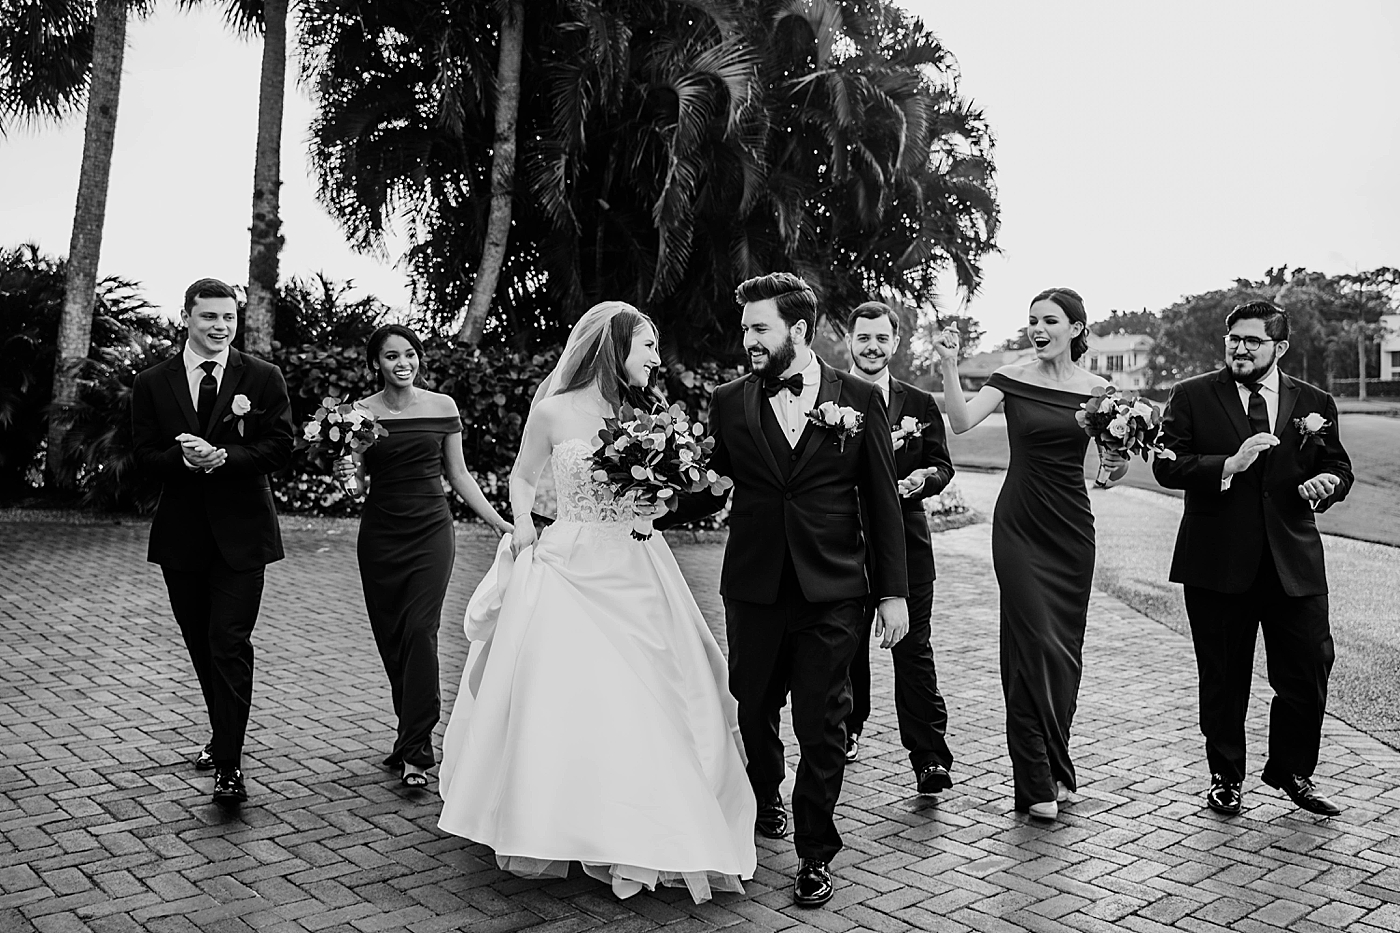 Black and White shot of Bride and Groom walking looking at each other with wedding party following Breakers West Wedding Photography captured by South Florida Wedding Photographer Krystal Capone Photography 